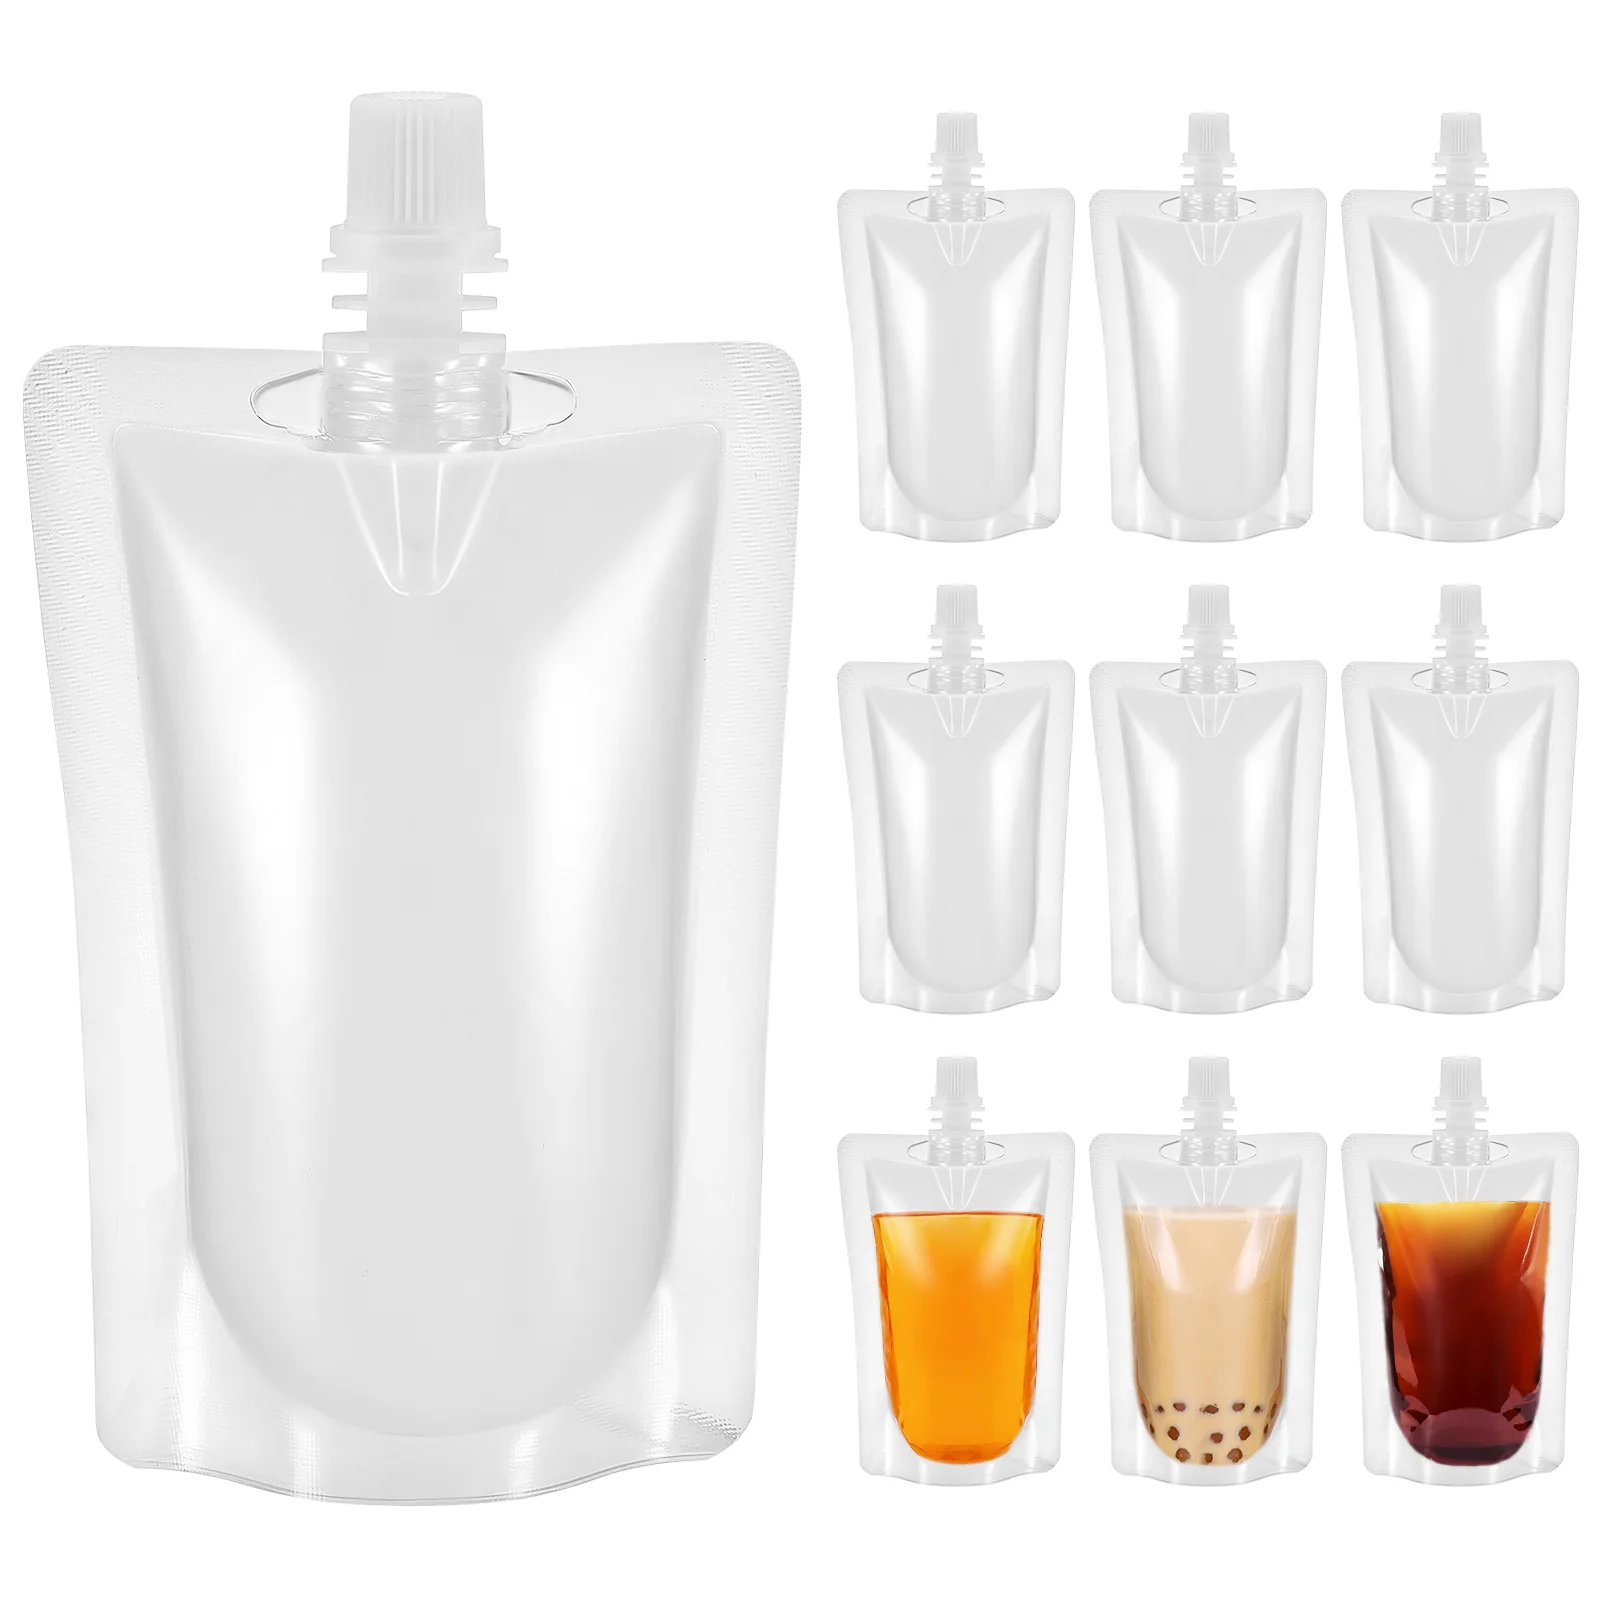 

Flask Pouches Plastic Flasks Drink Adults Reusable Drinks Disposable Cruise Clear Smuggling Pouch Portable Runners Rum Spout